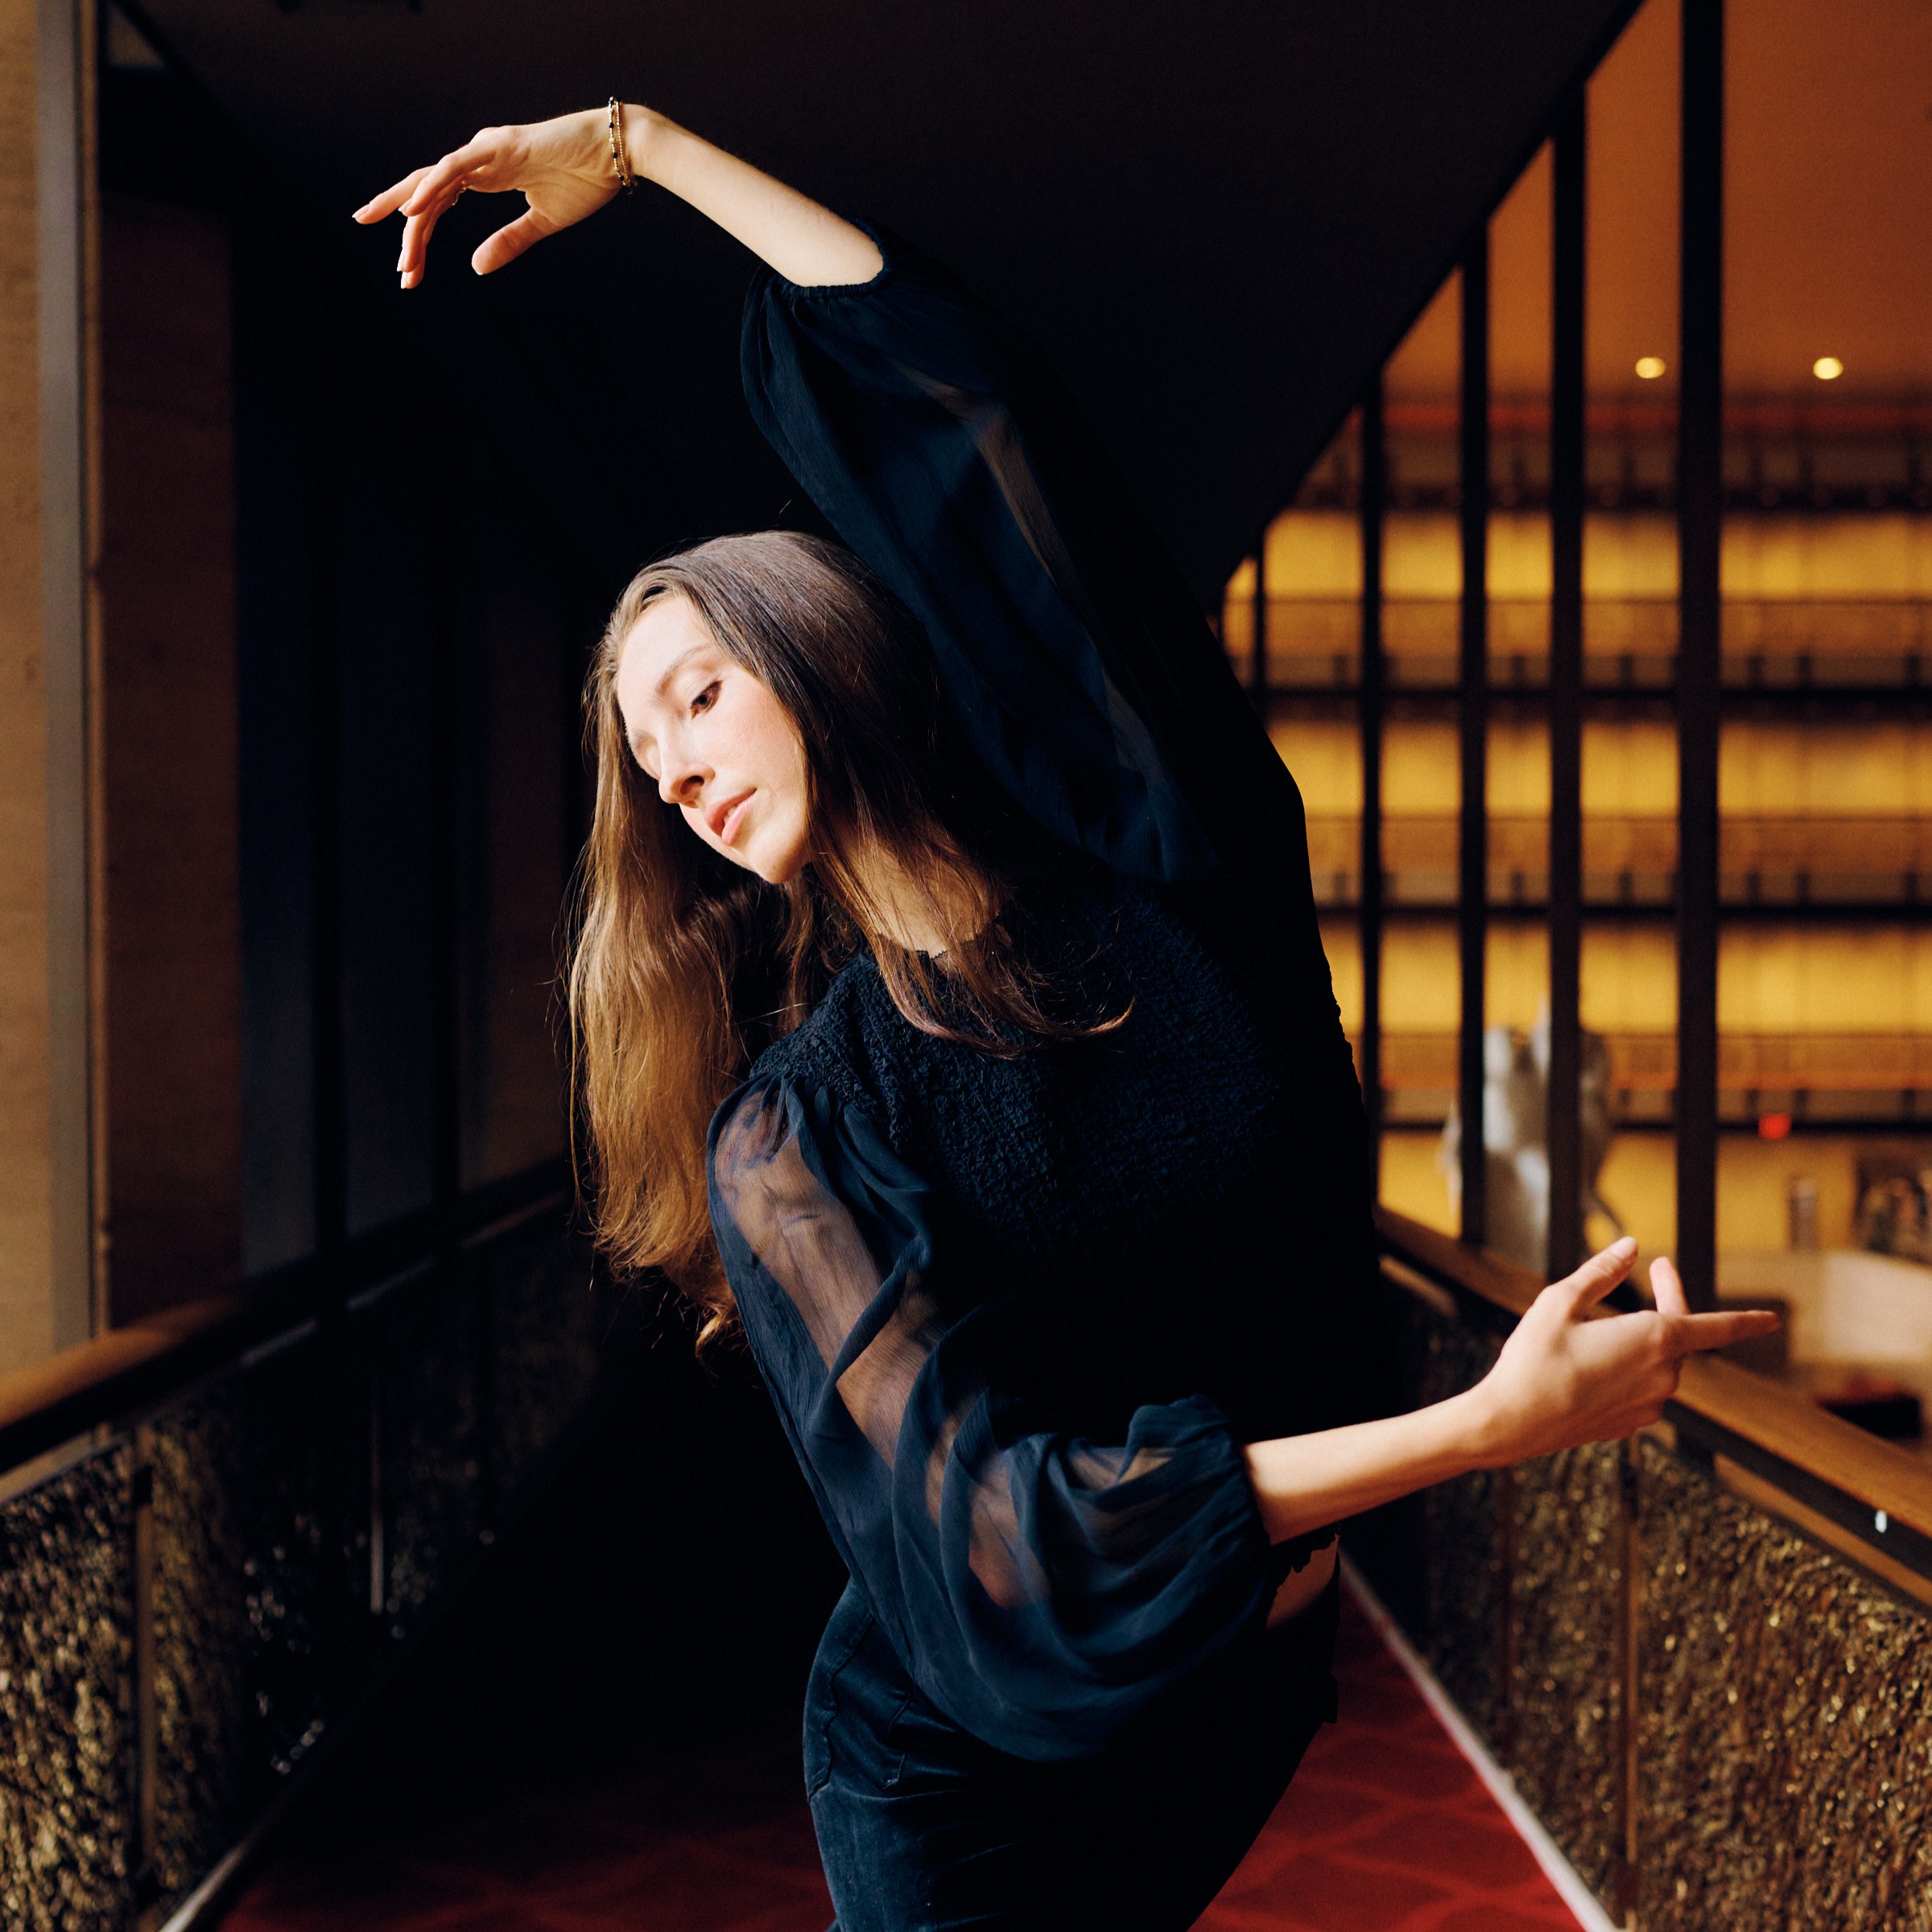 a female dancer wearing a blue long sleeved shirt stretching to the side with her arms in 4th position